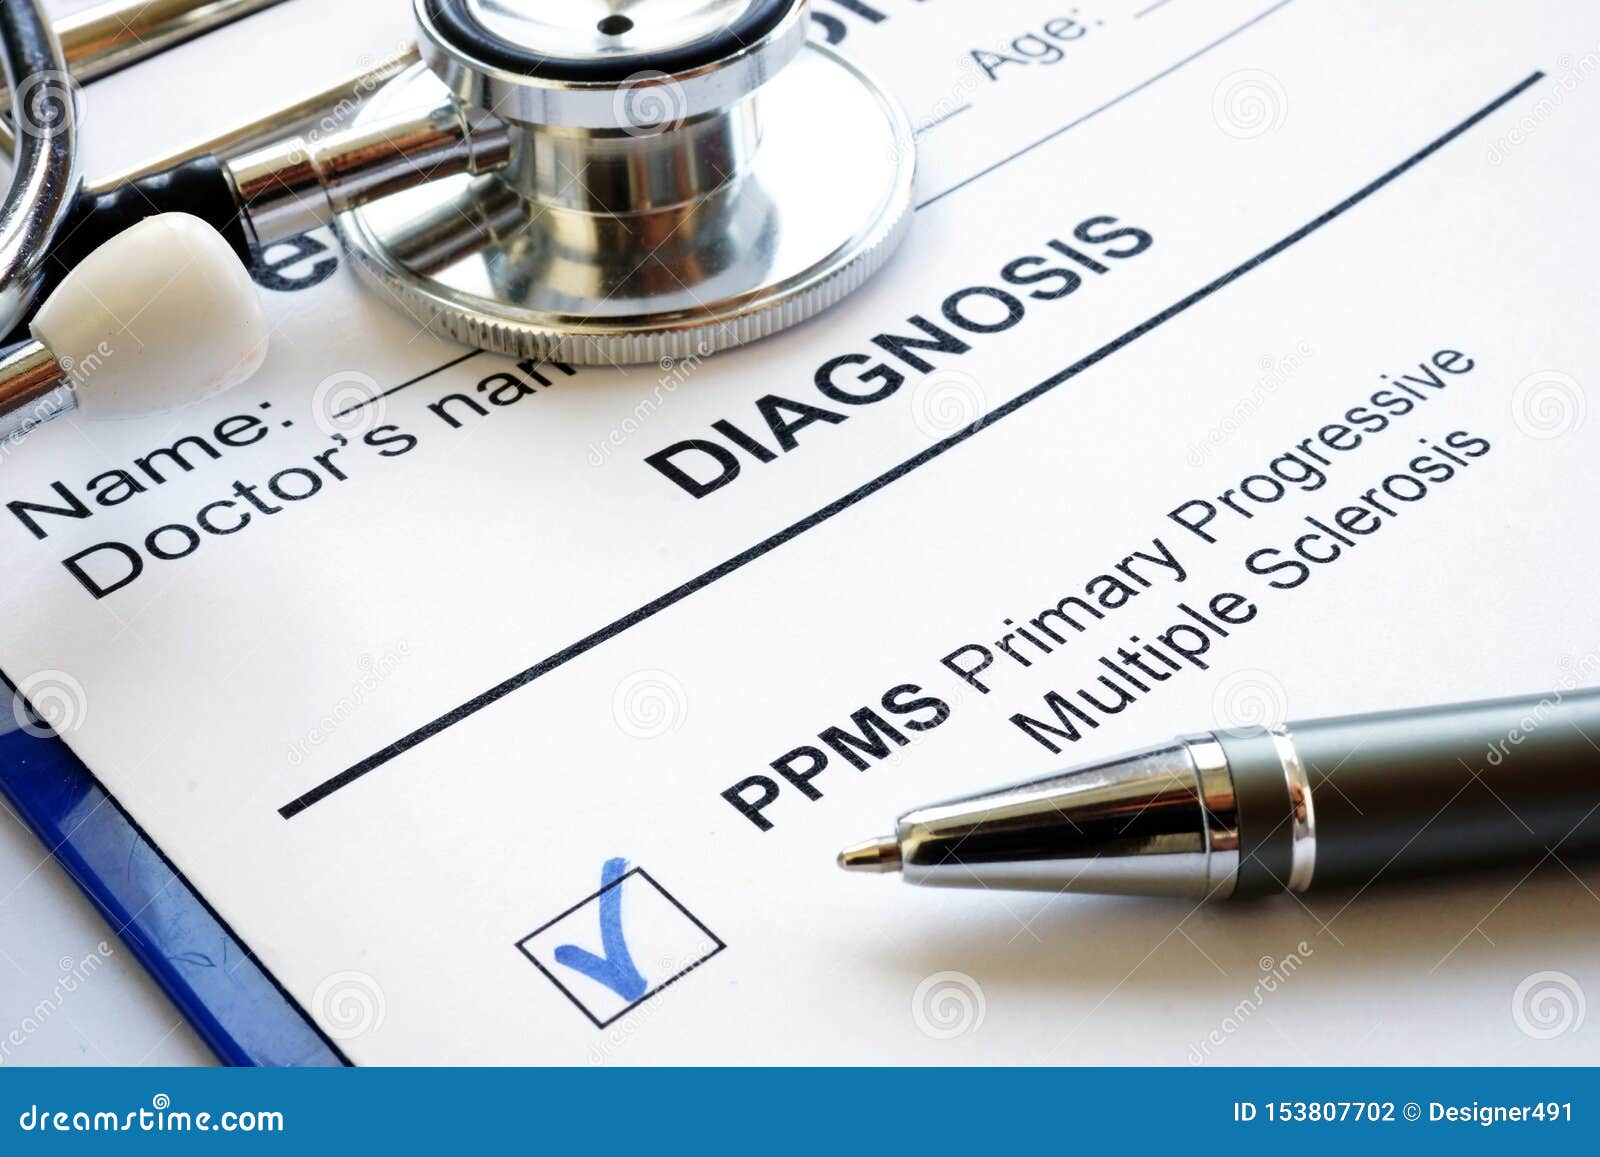 diagnosis primary progressive multiple sclerosis ppms